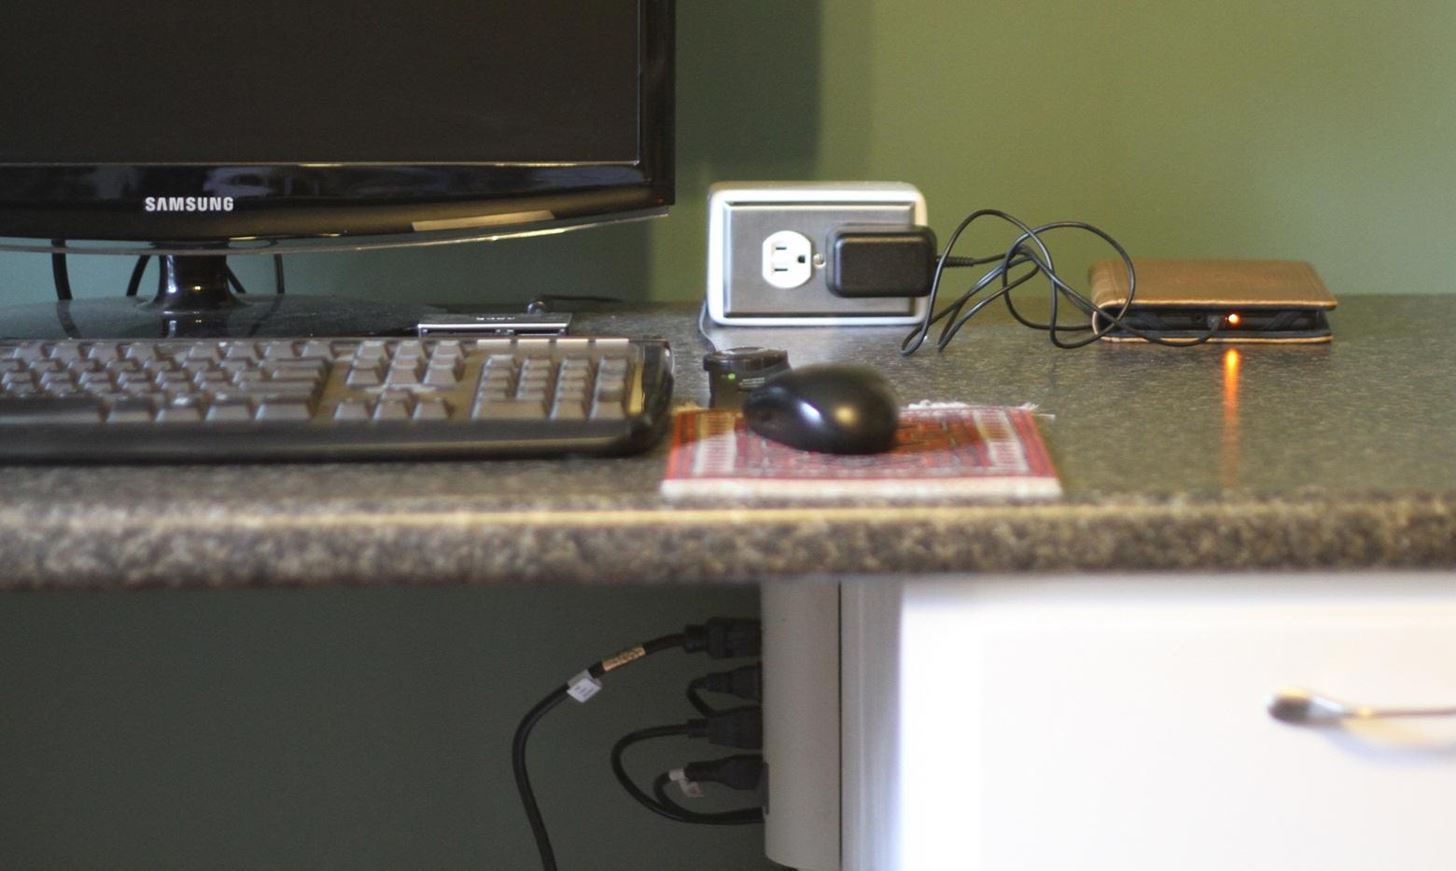 Hate Ugly-Looking Power Strips? Make This Sleek DIY Power Outlet Box for Your Desktop